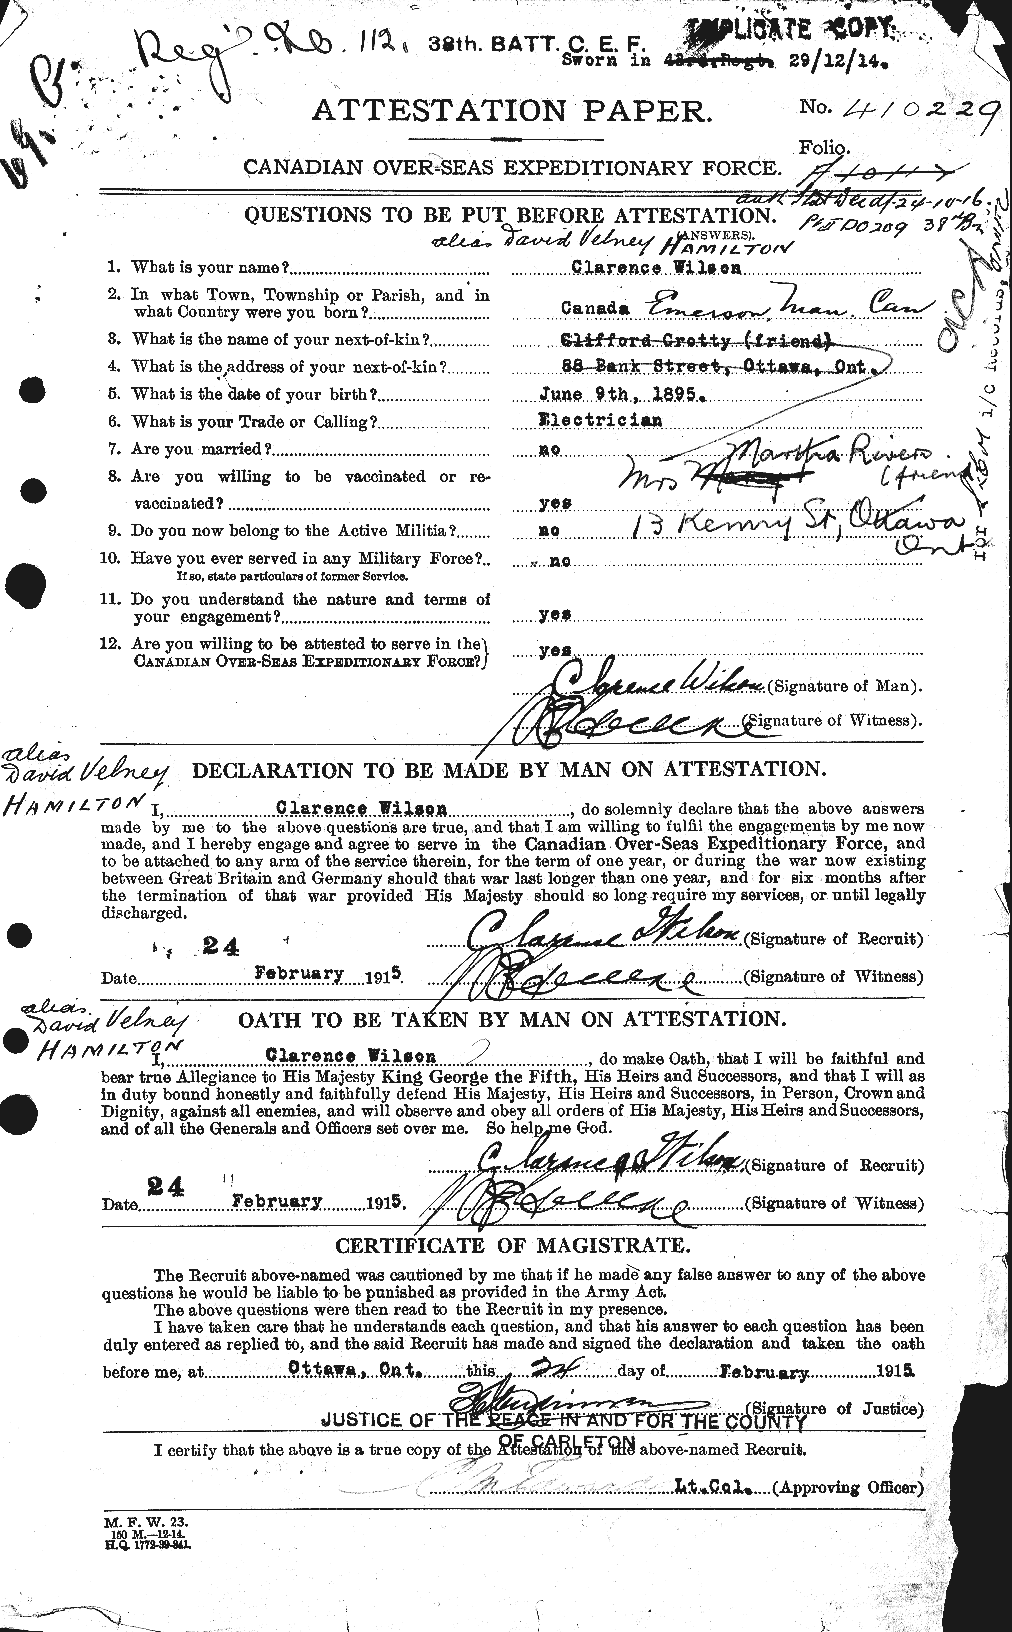 Personnel Records of the First World War - CEF 375354a